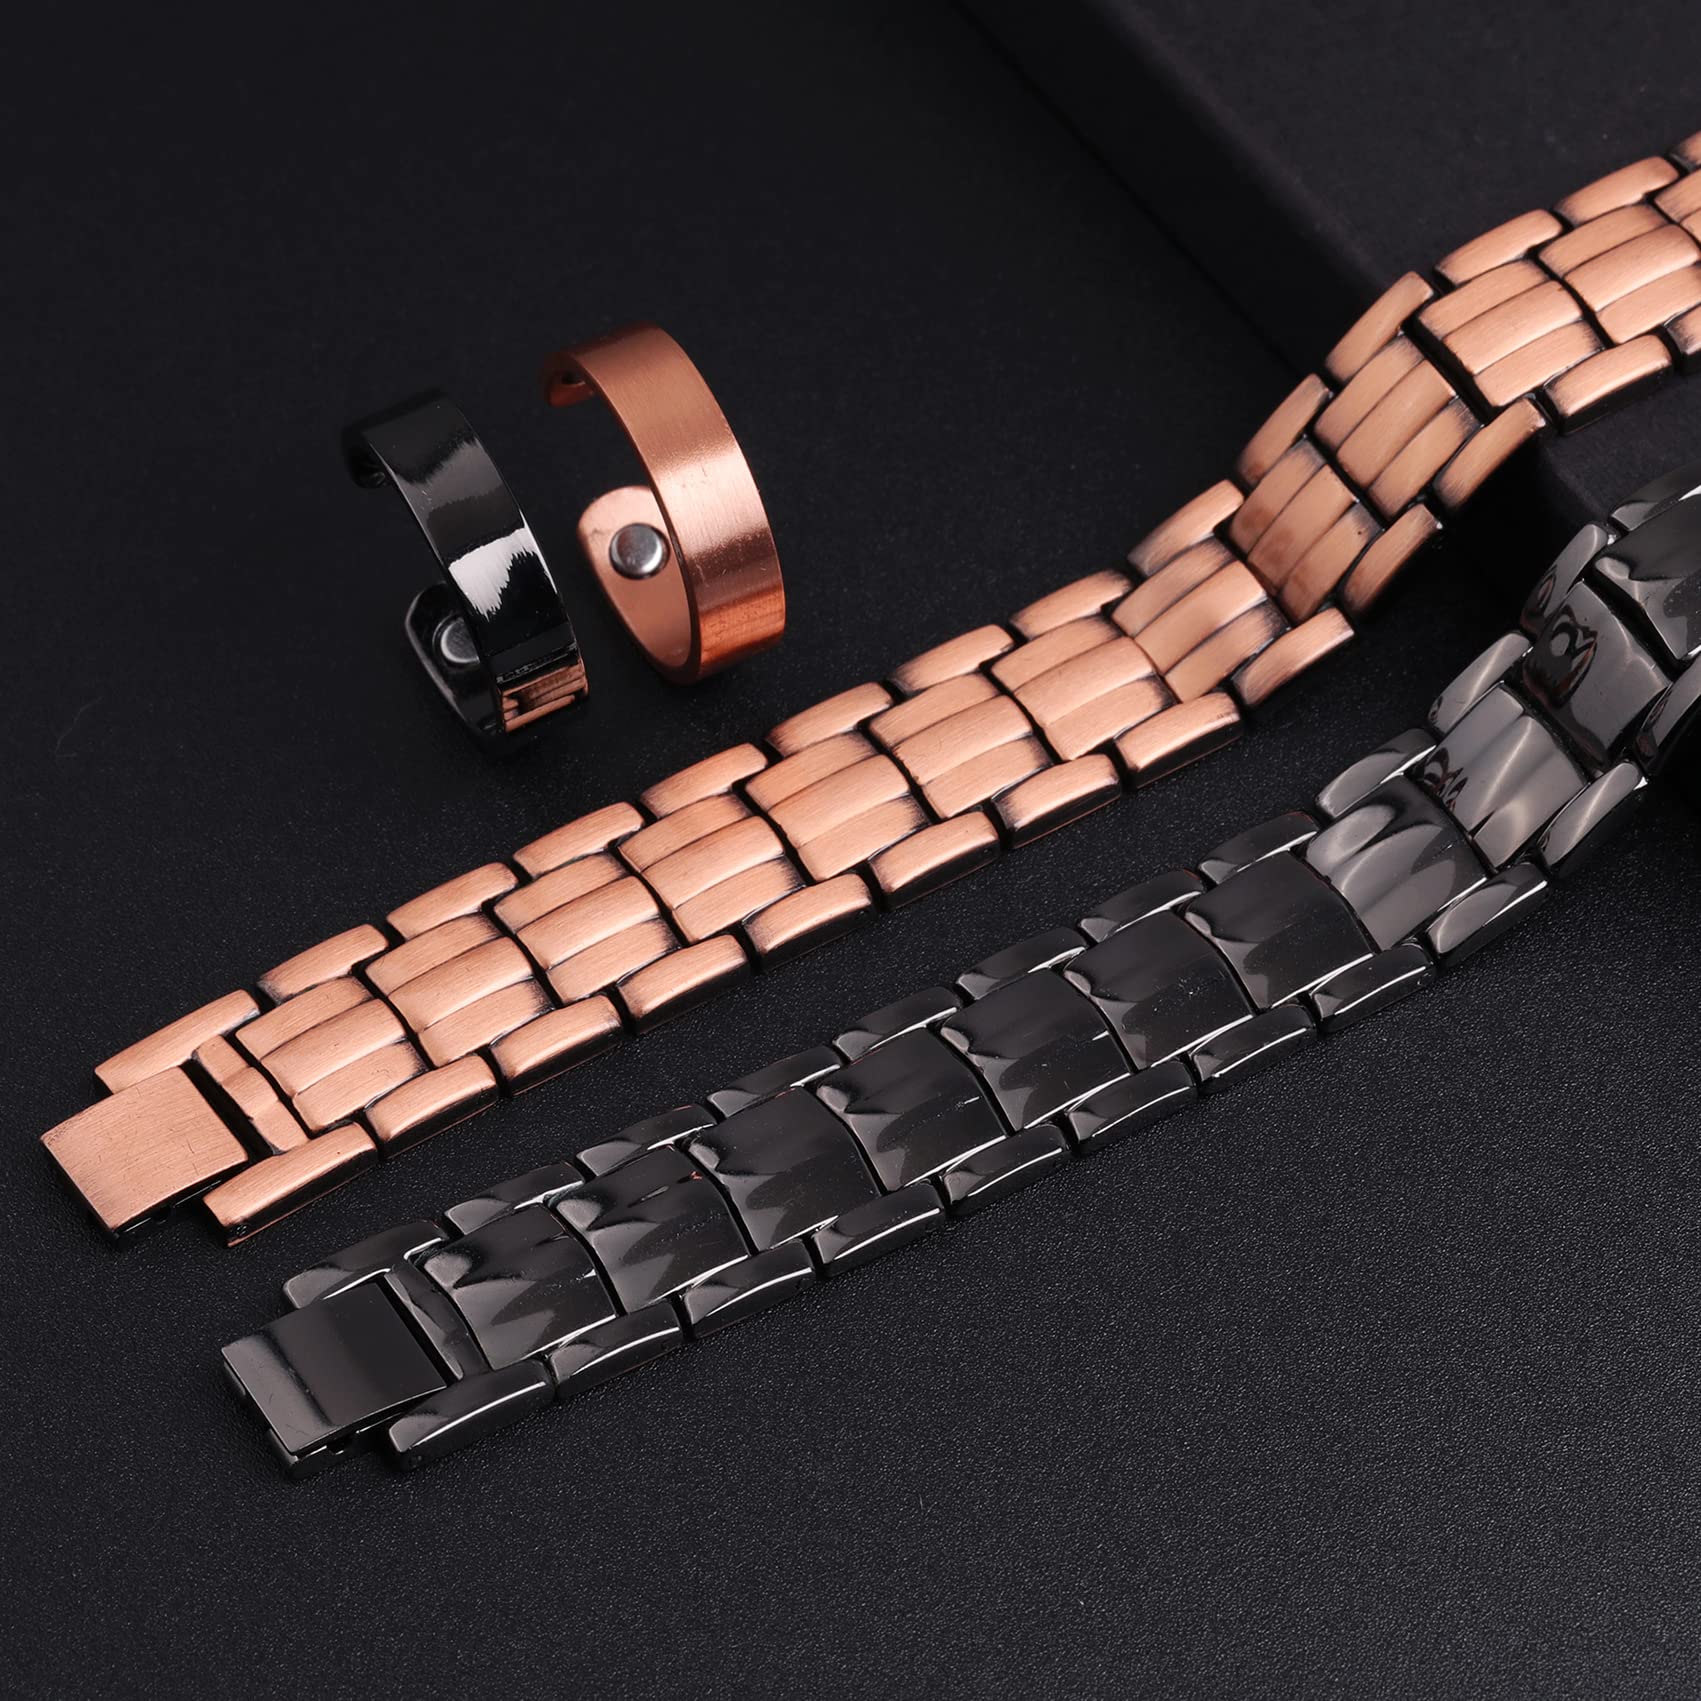 Feraco Copper Bracelet for Men - Magnetic Copper Magnetic Bracelets - 100% Pure Copper Jewelry Gift with Adjustable Sizing Tool